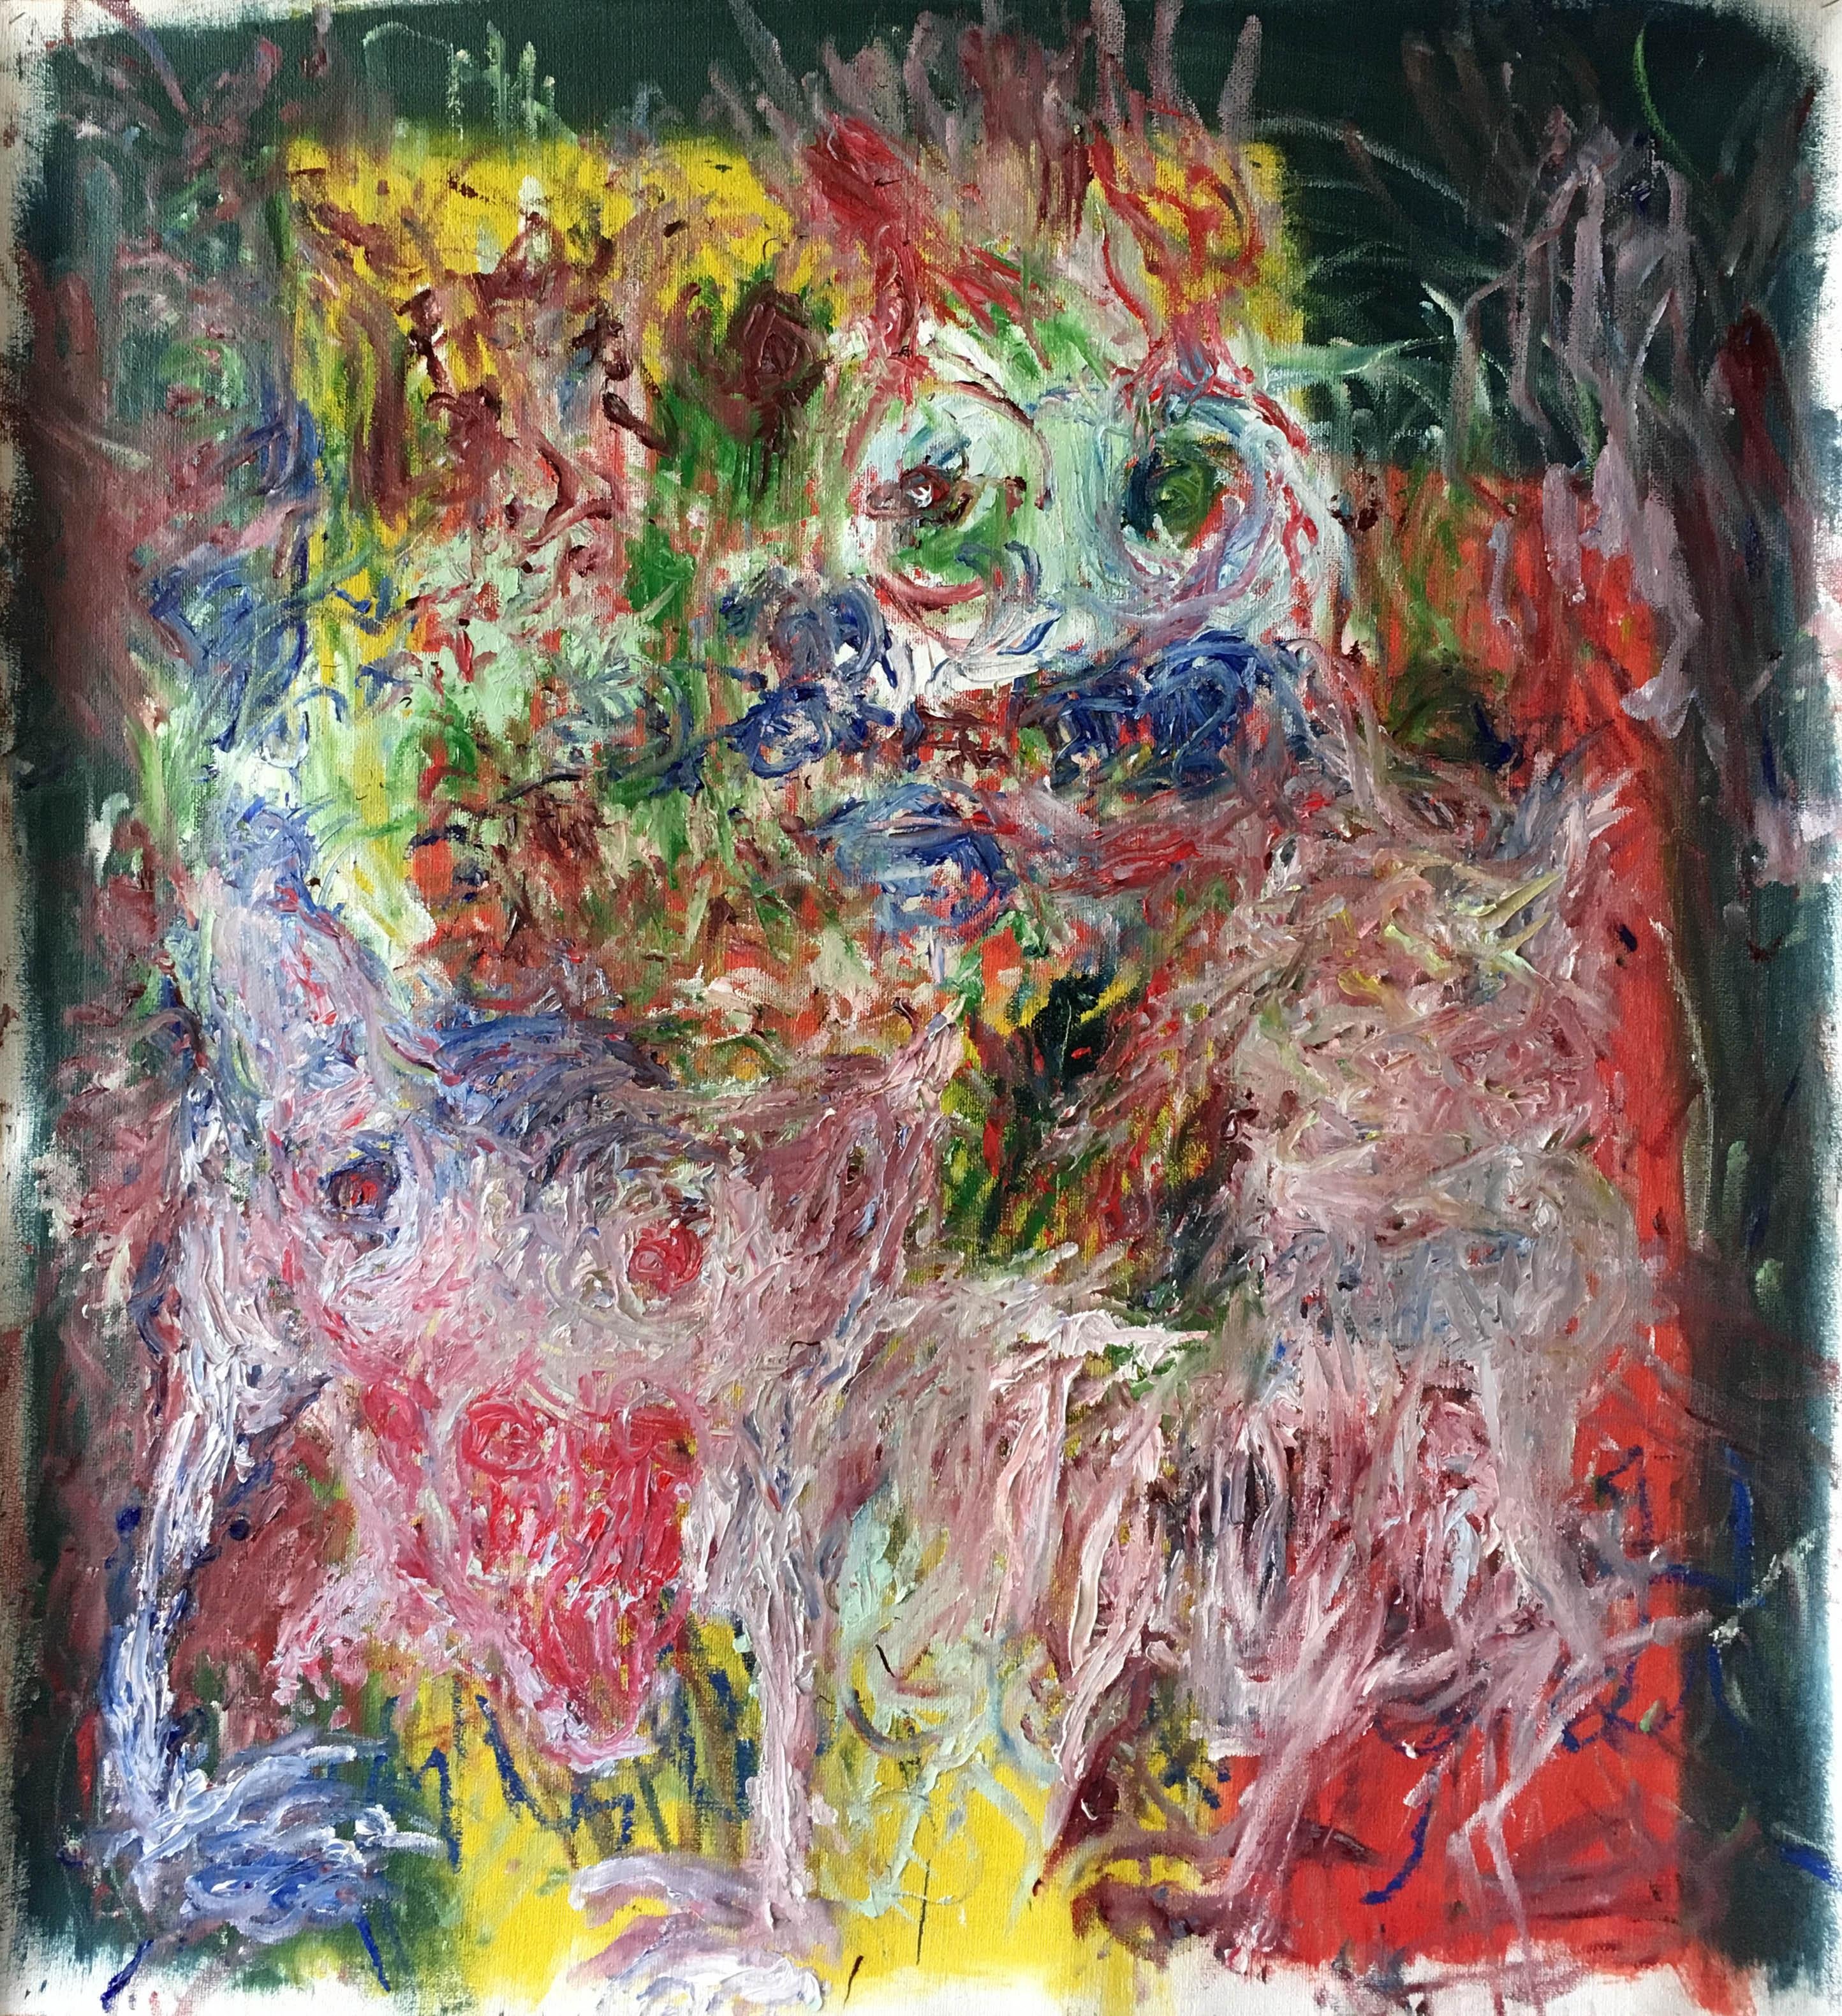 He grabs it by the tail - Julien Wolf, Contemporary Expressionist Painting